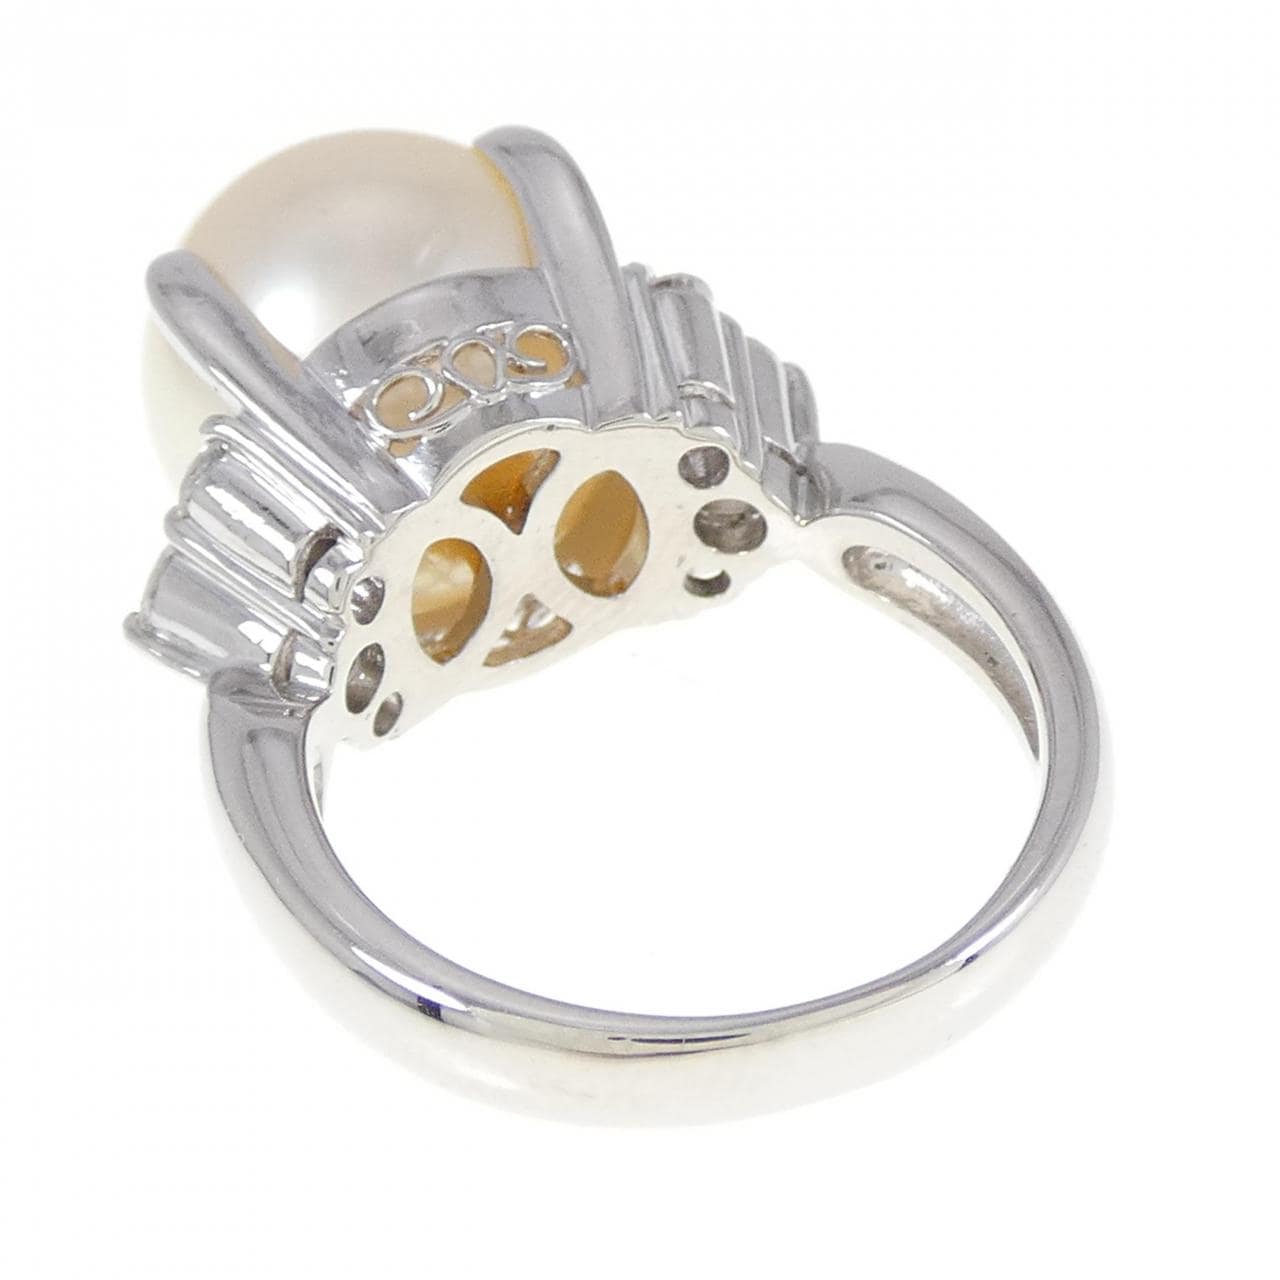 PT White Butterfly Pearl Ring 11.7mm